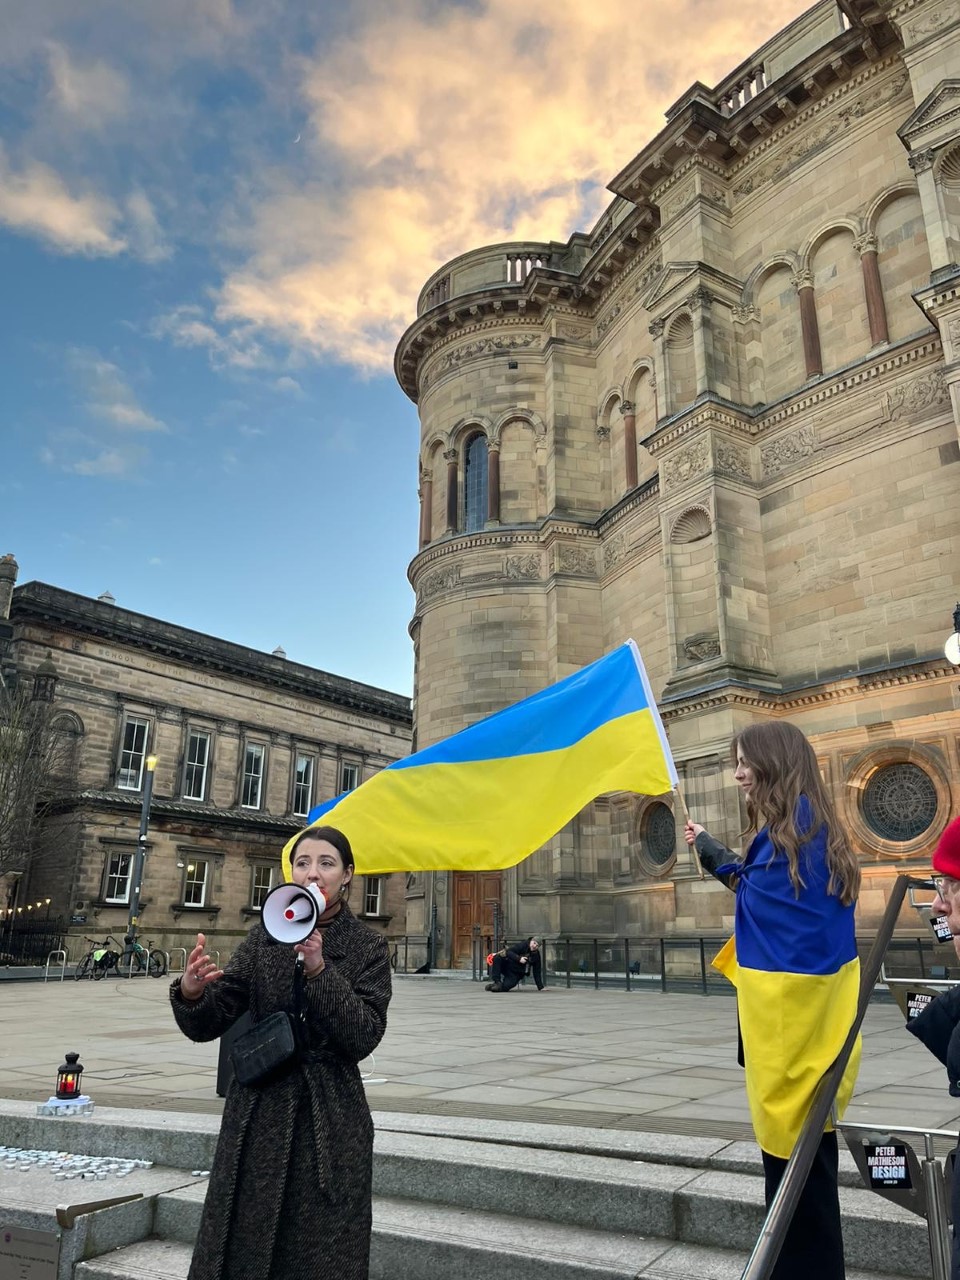 President of Ukrainian society and speaker from the Polish society at the Vigil in Bristo Square